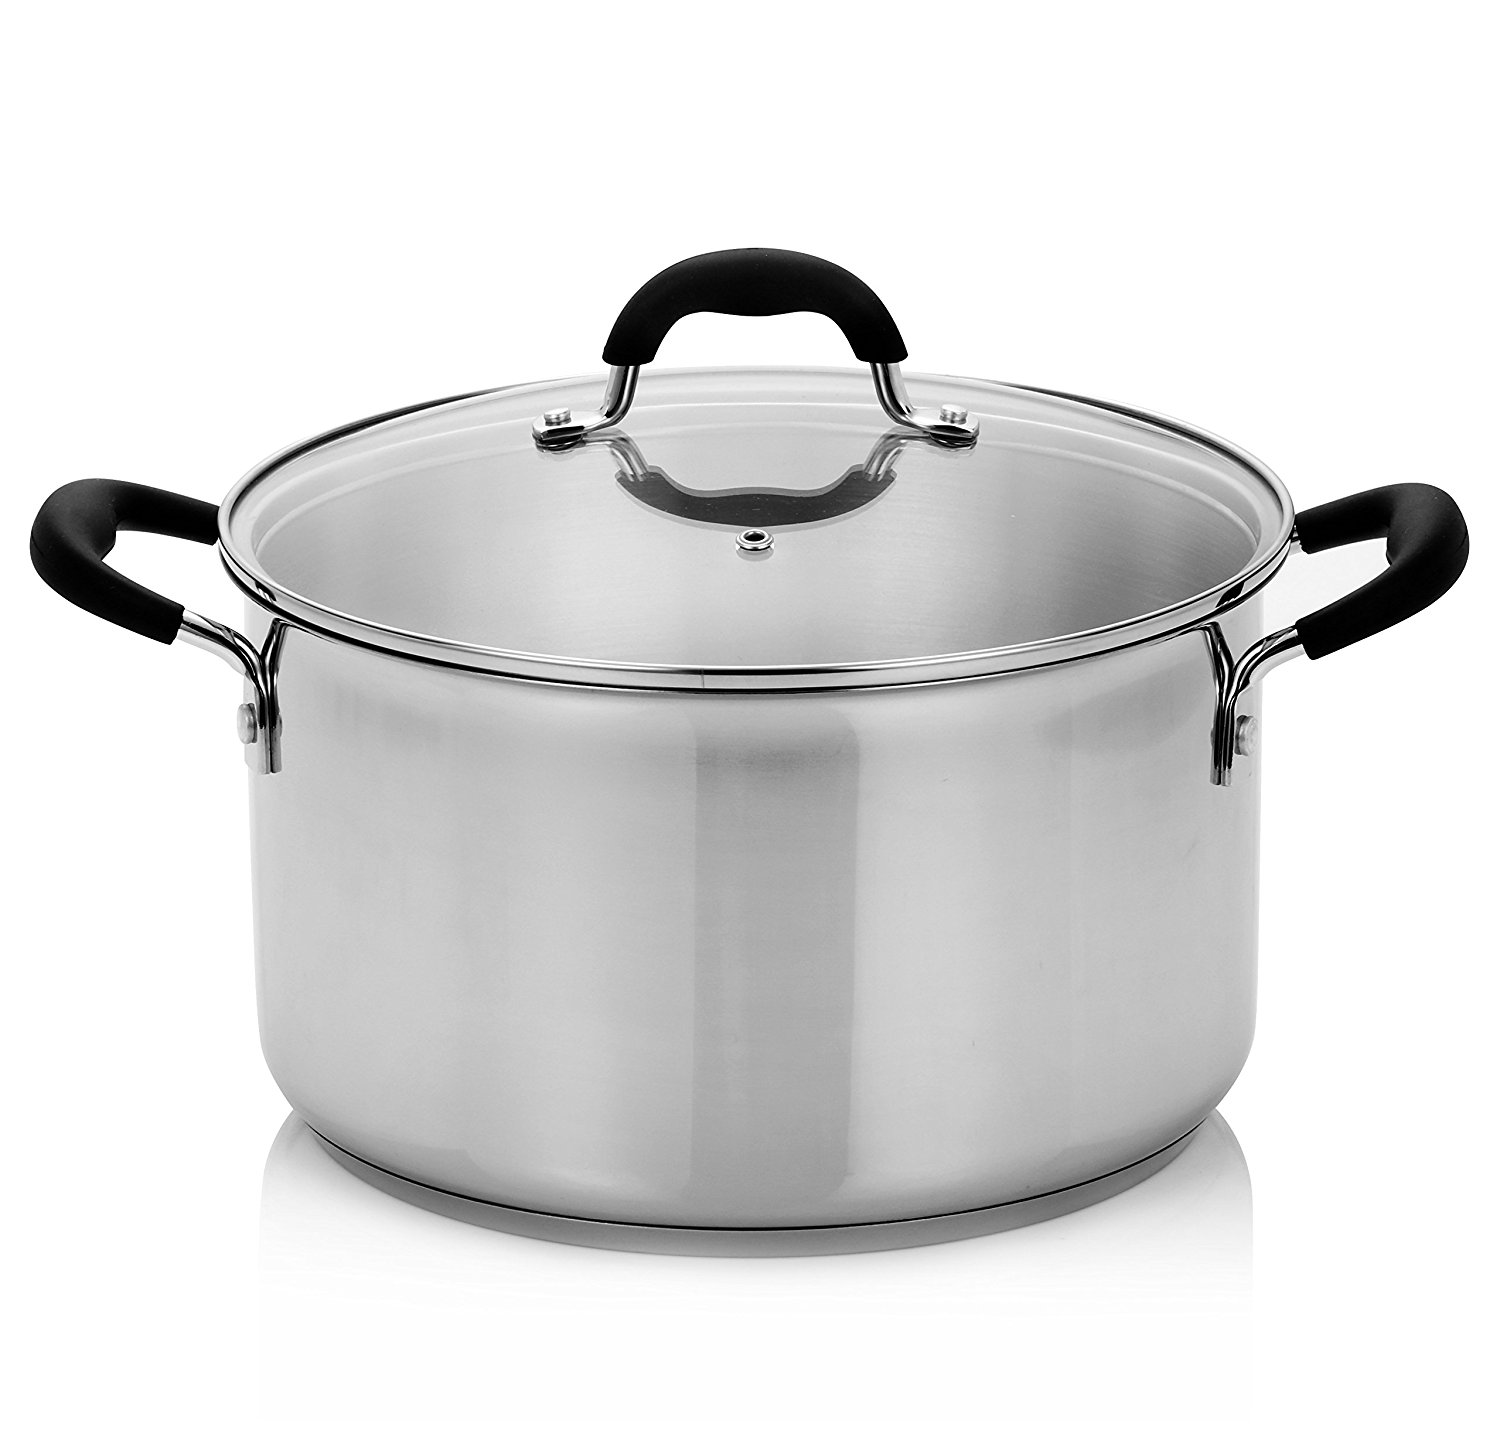  Finnhomy Approved AISI304 (18-10) Stainless Steel 8-Quart Stock Pot with Cover, 3 Layers Base,Induction Base Safe, Metallic - Stainless Steel Pot